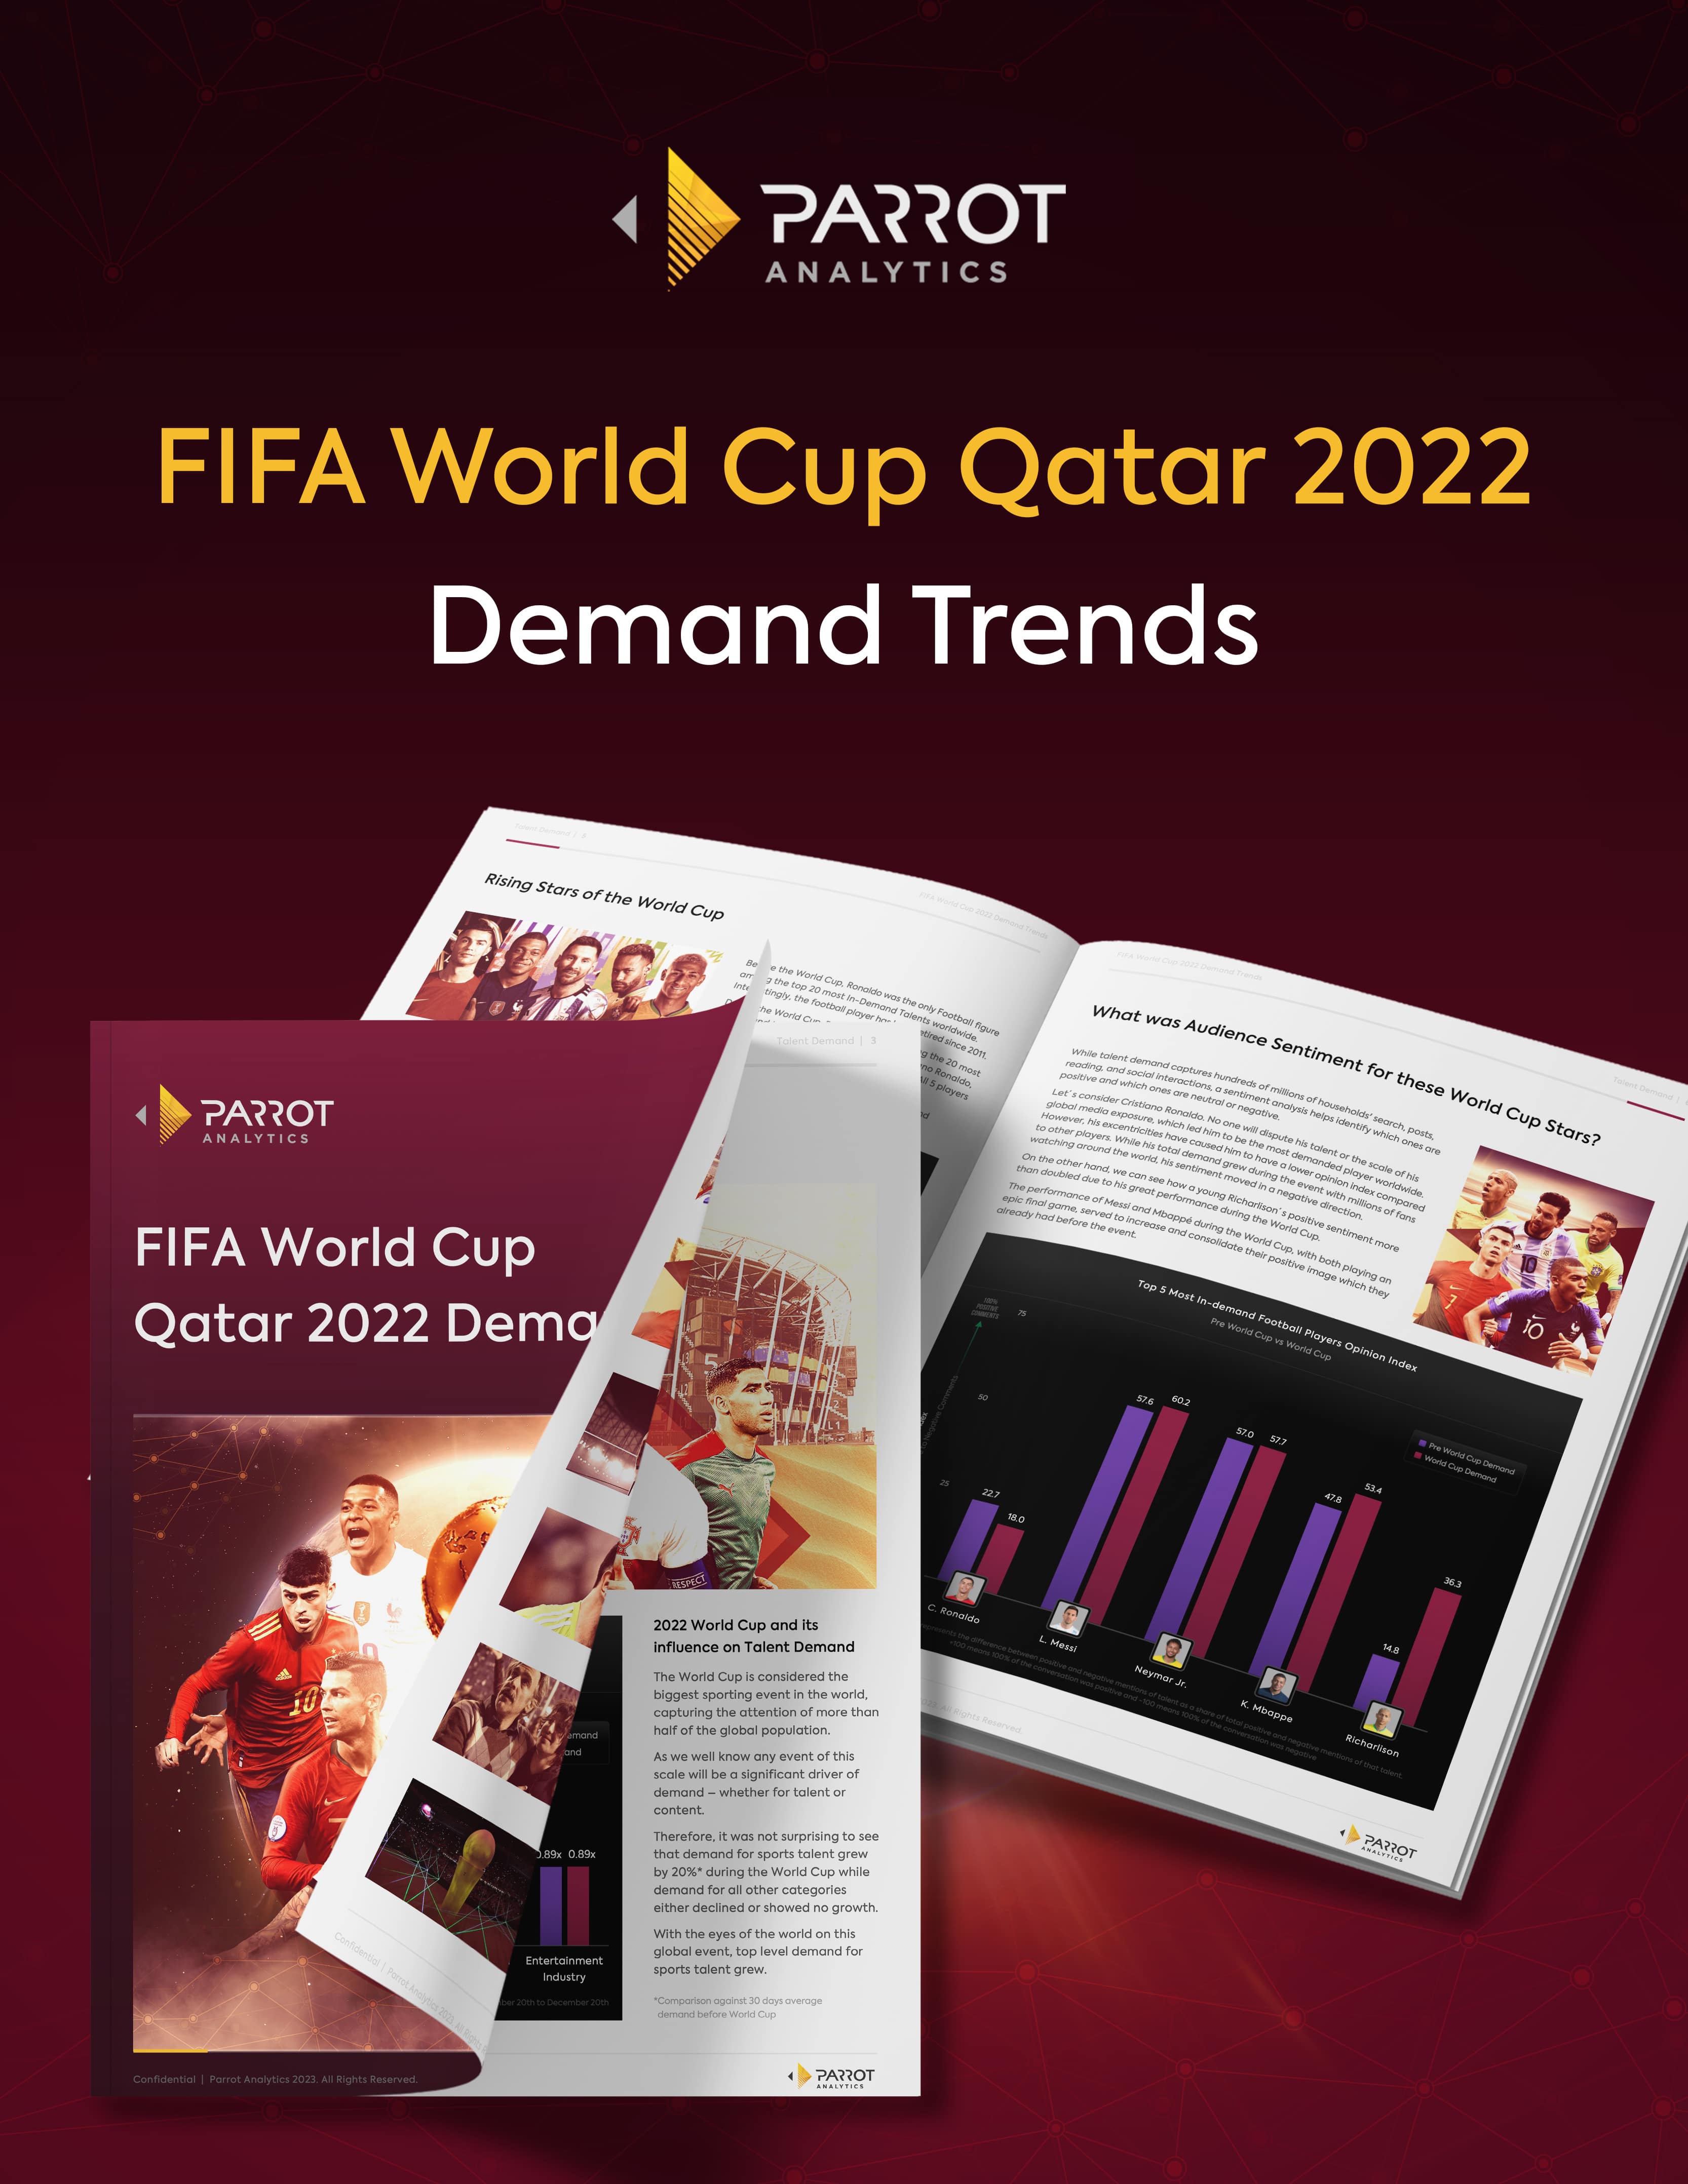 Parrot_Analytics_World_Cup_Talent_Demand_Trends_Landing_Page_Promo_833x1078@2x-min